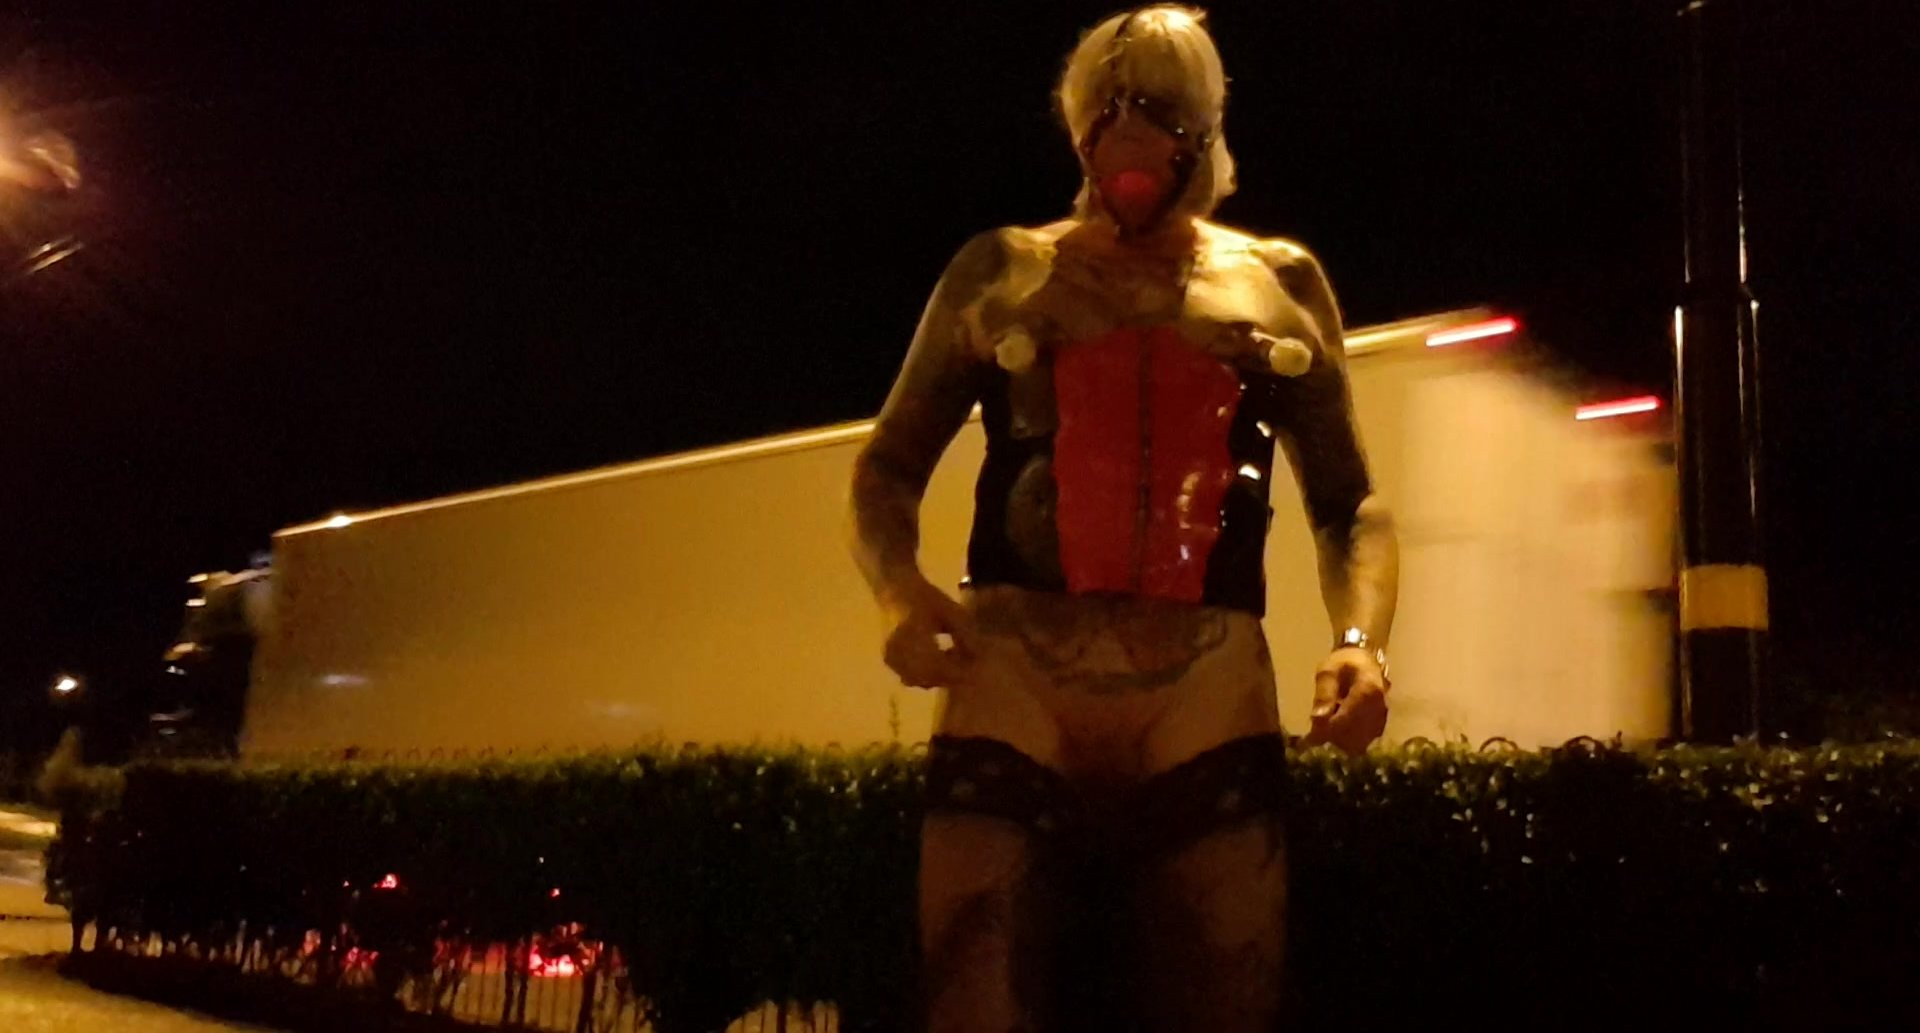 Humiliating myself and wanking outside my house